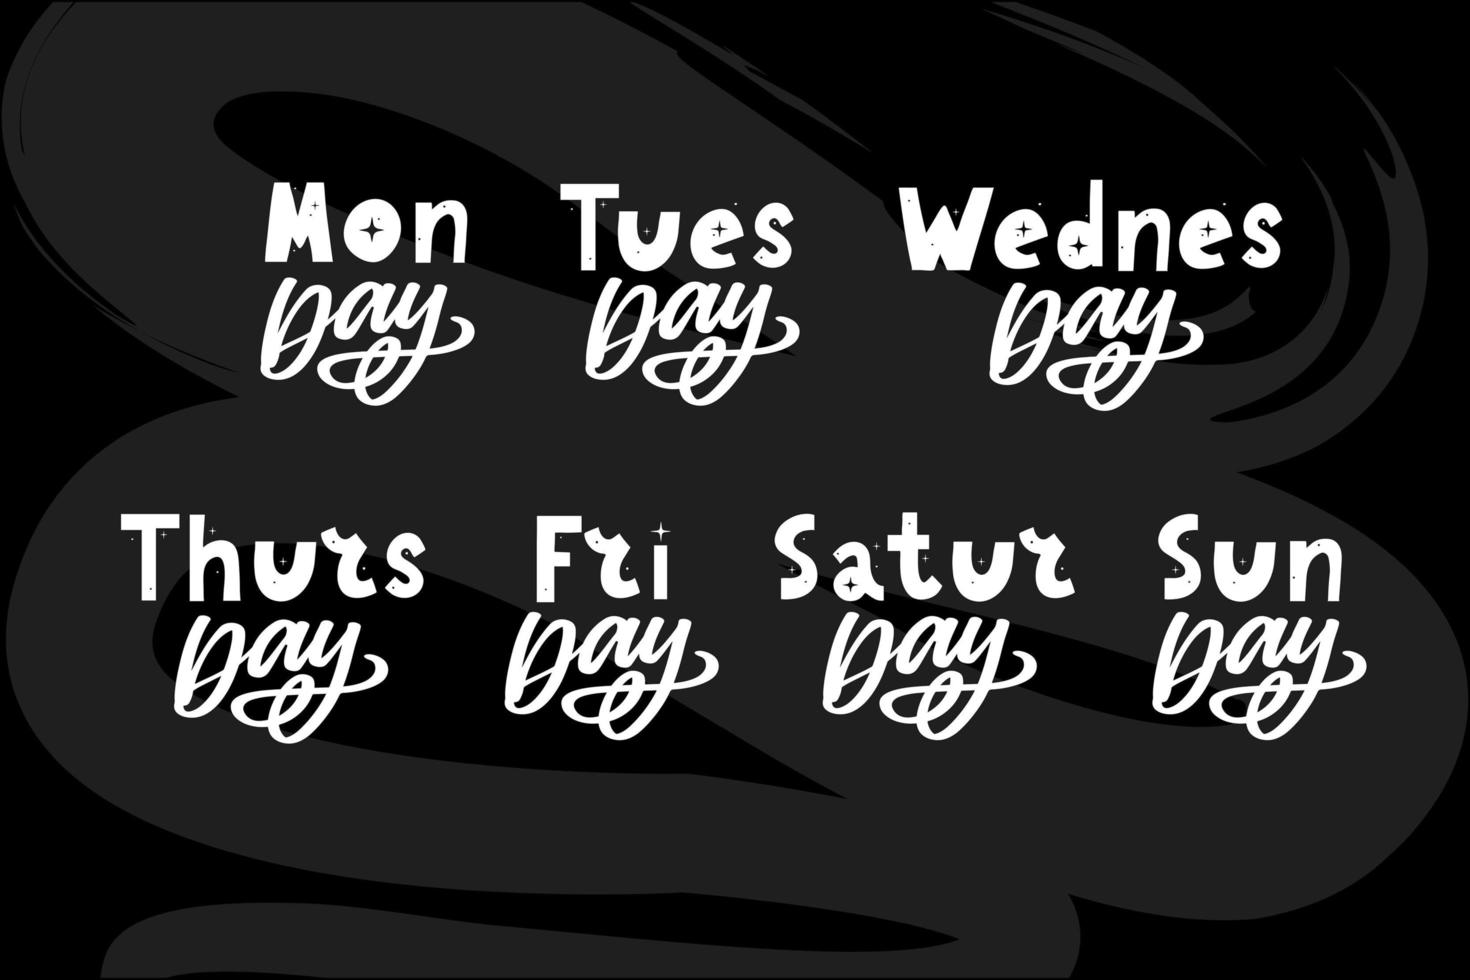 Names of days of the week, vintage grunge typographic, uneven stamp style lettering for your calendar designs vector